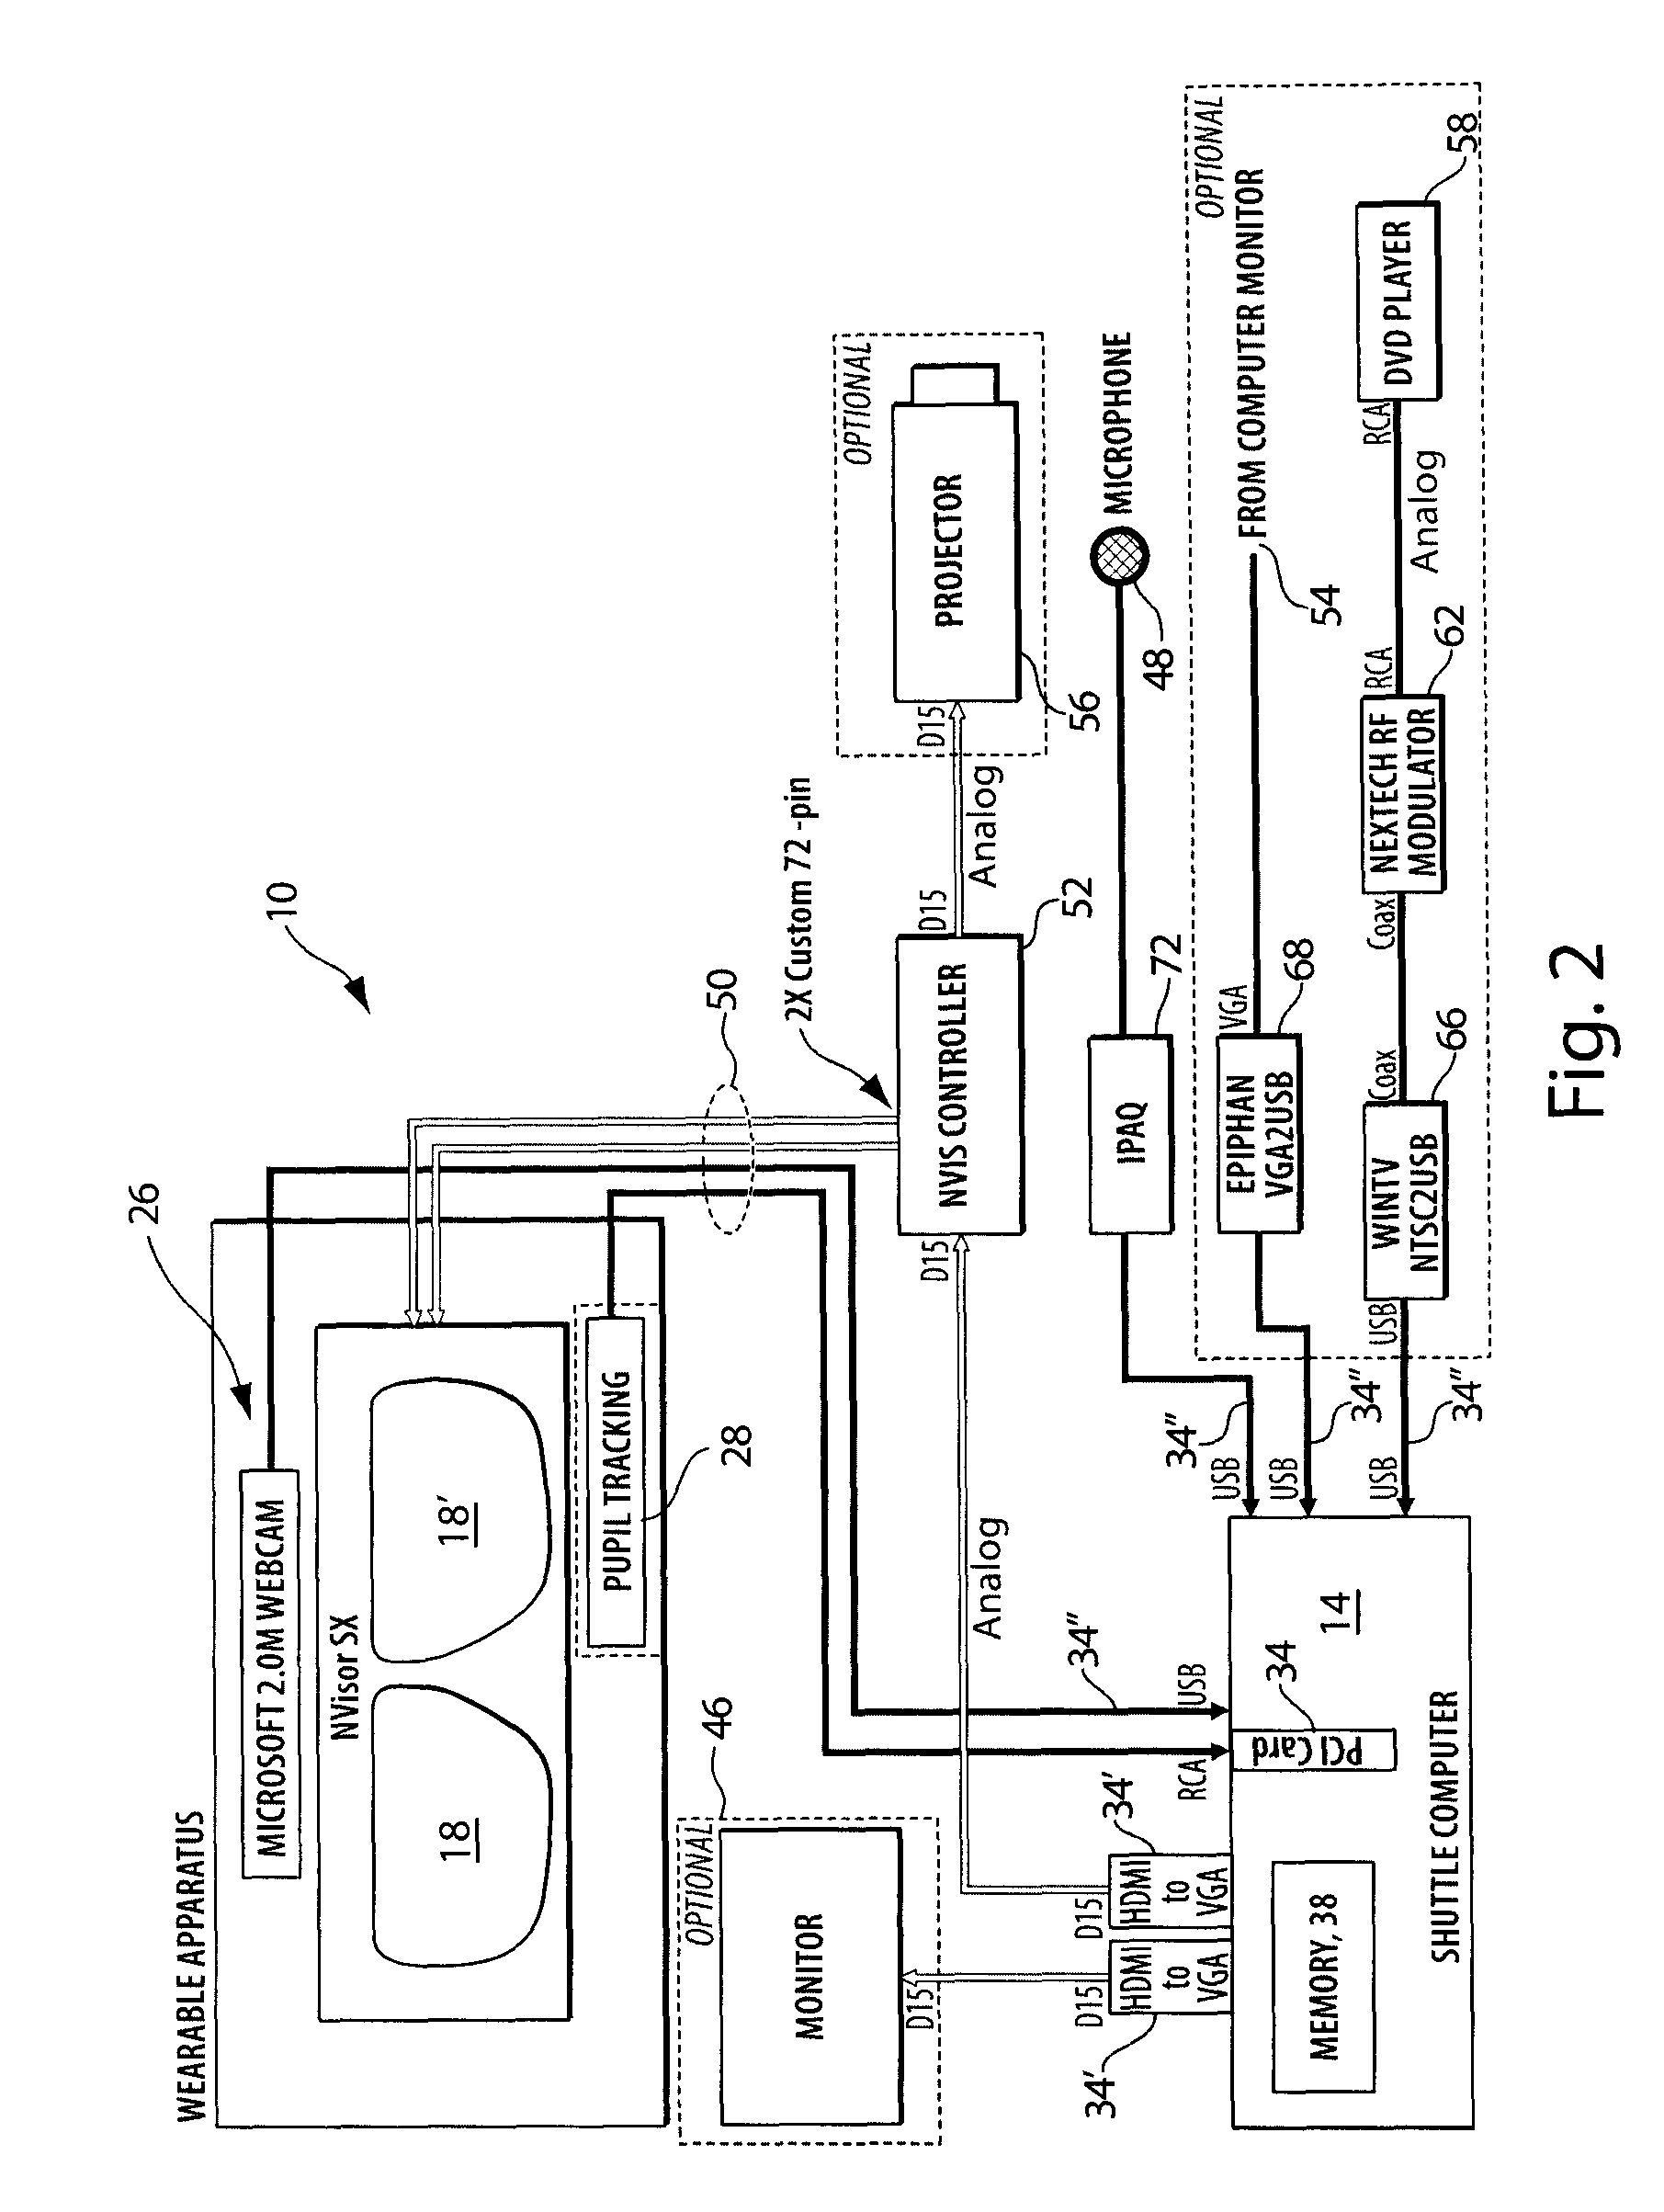 Apparatus and method for augmenting sight